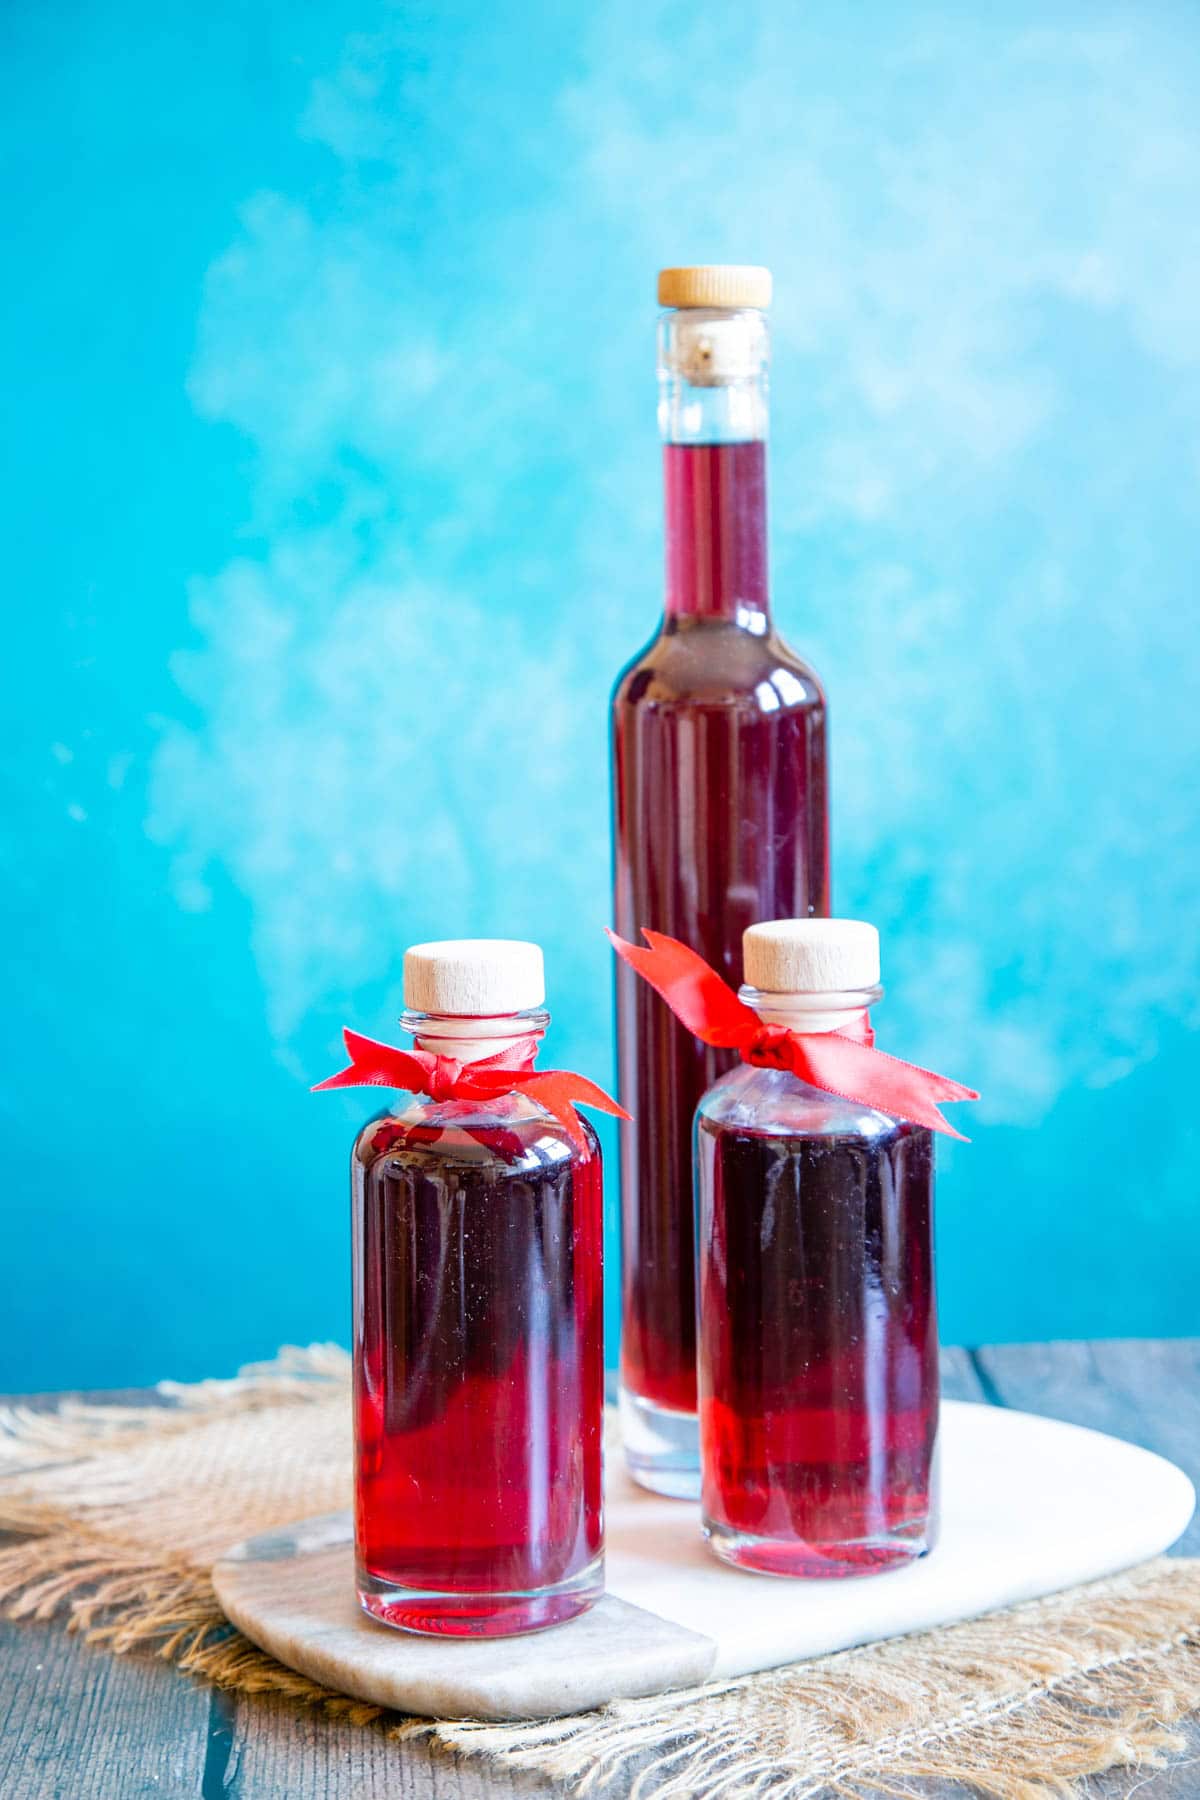 Damson gin, bottled in pretty containers, makes a lovely homemade gift.